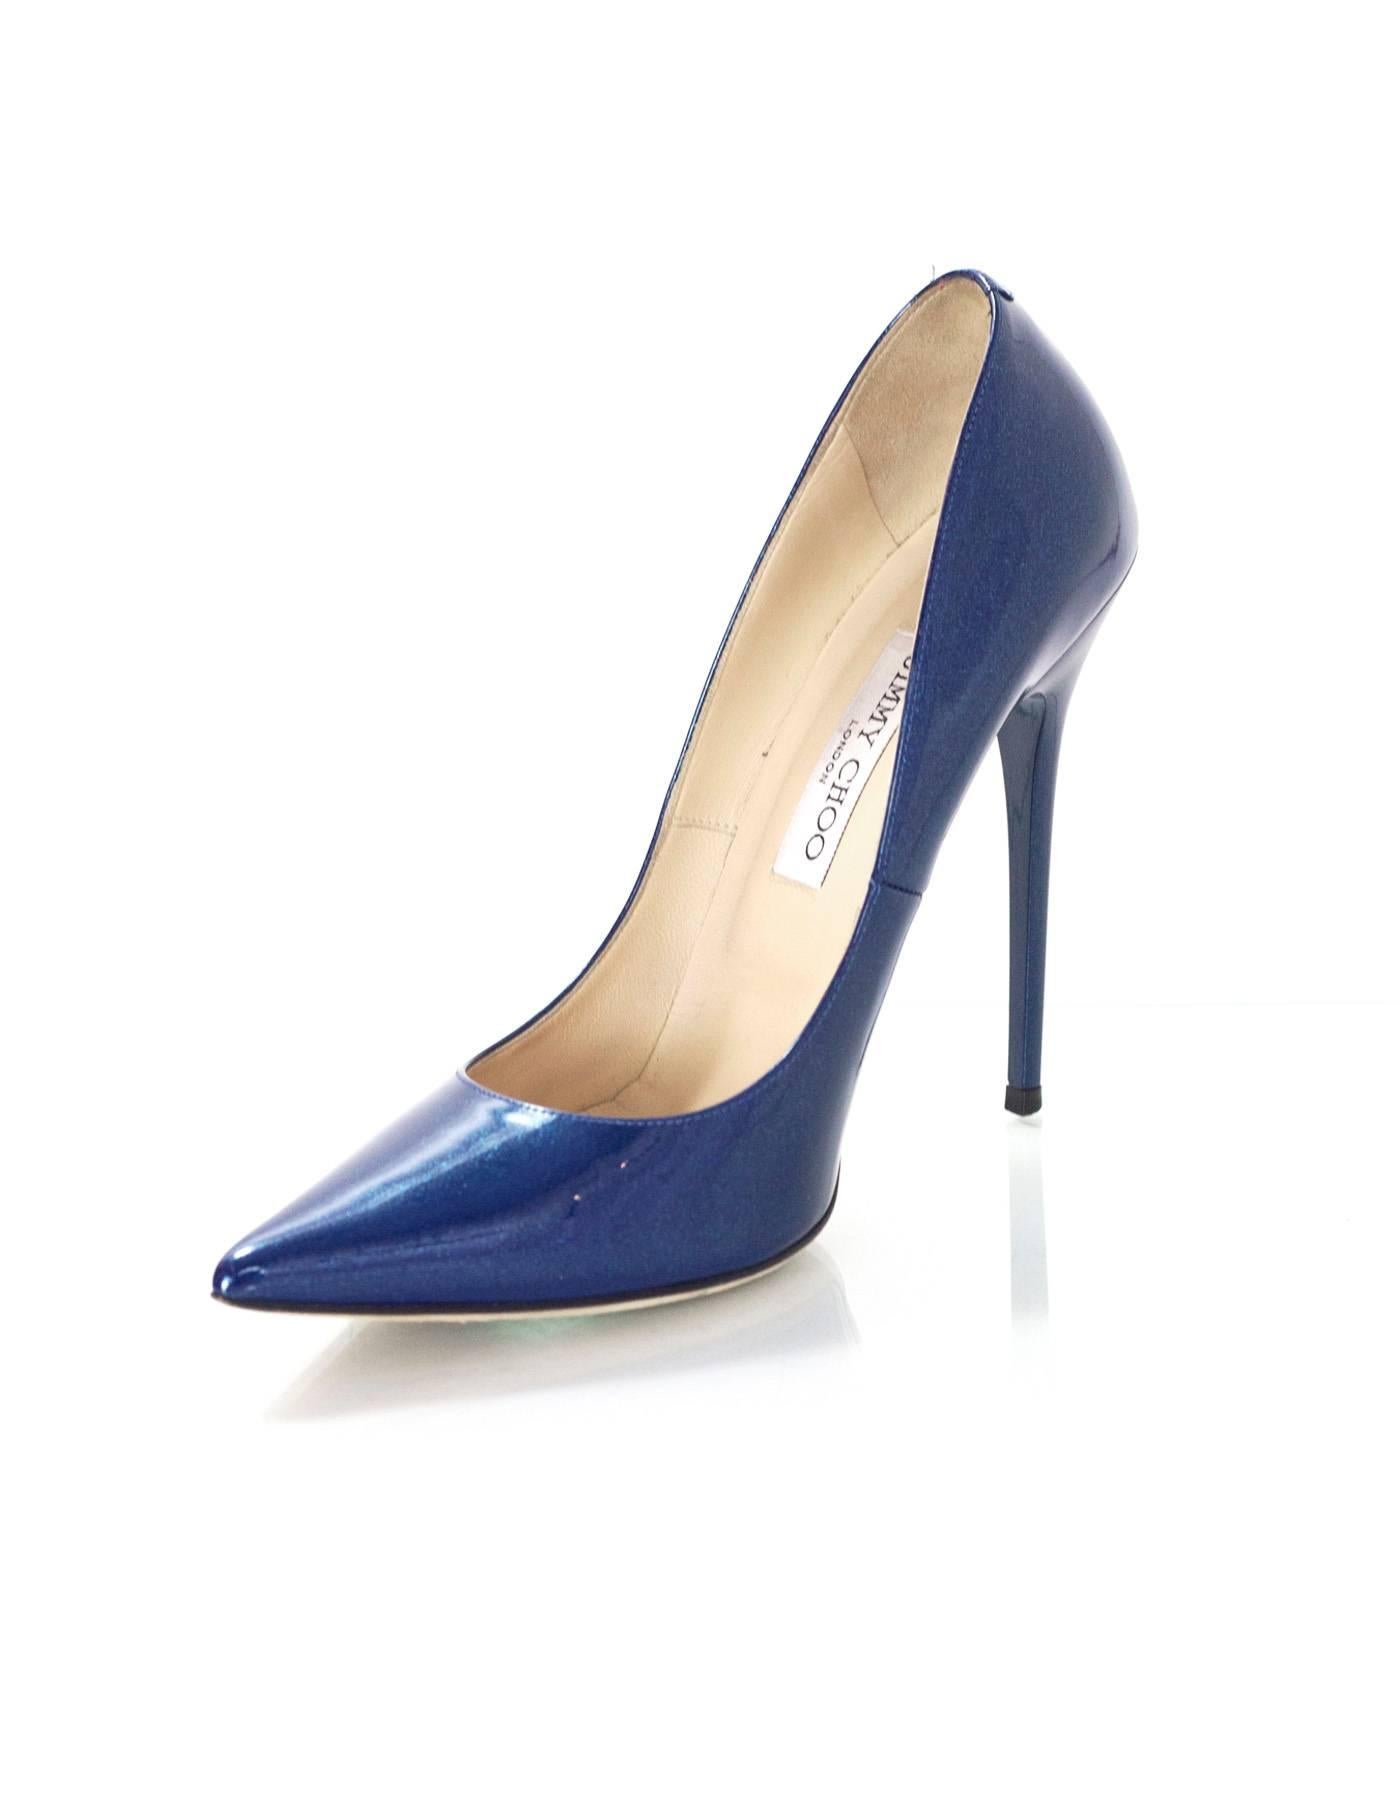 Jimmy Choo Blue Patent Glitter Leather Pumps Sz 39.5

Made In: Italy
Color: Blue
Materials: Patent leather
Closure/Opening: Slide on
Sole Stamp: Jimmy Choo London Made in Italy 39.5
Overall Condition: Excellent pre-owned condition with the exception